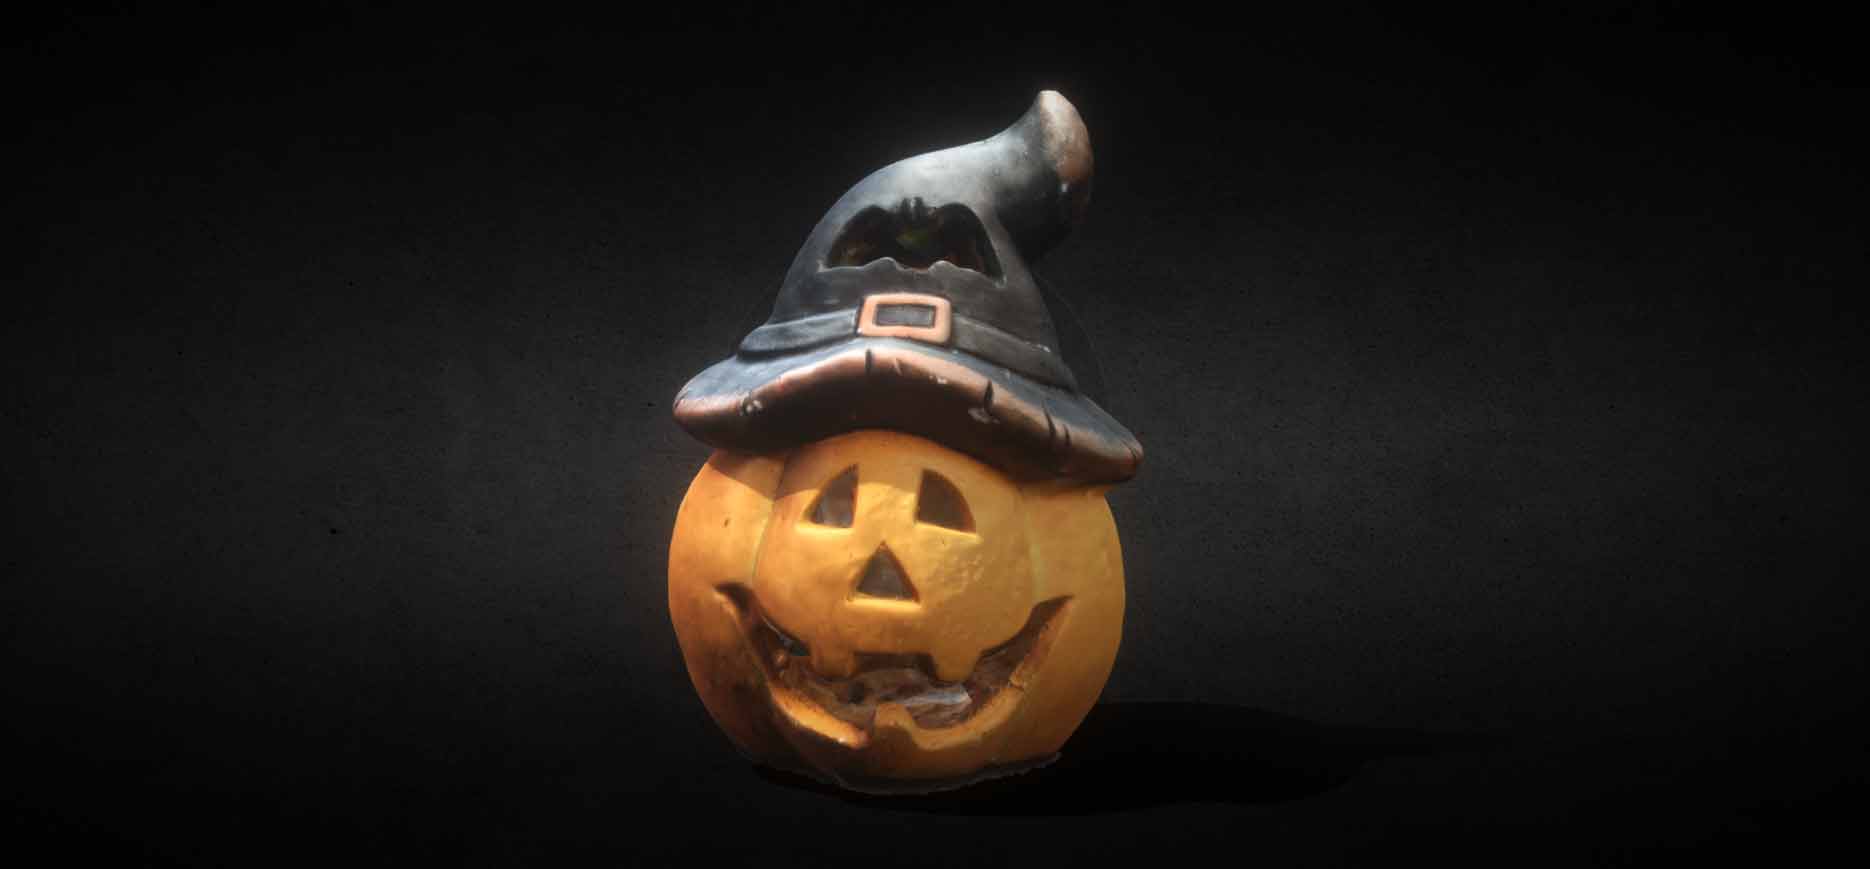 🎃👻Happy Halloween! Free 3D pumpkin and a 💀spooky skull to download